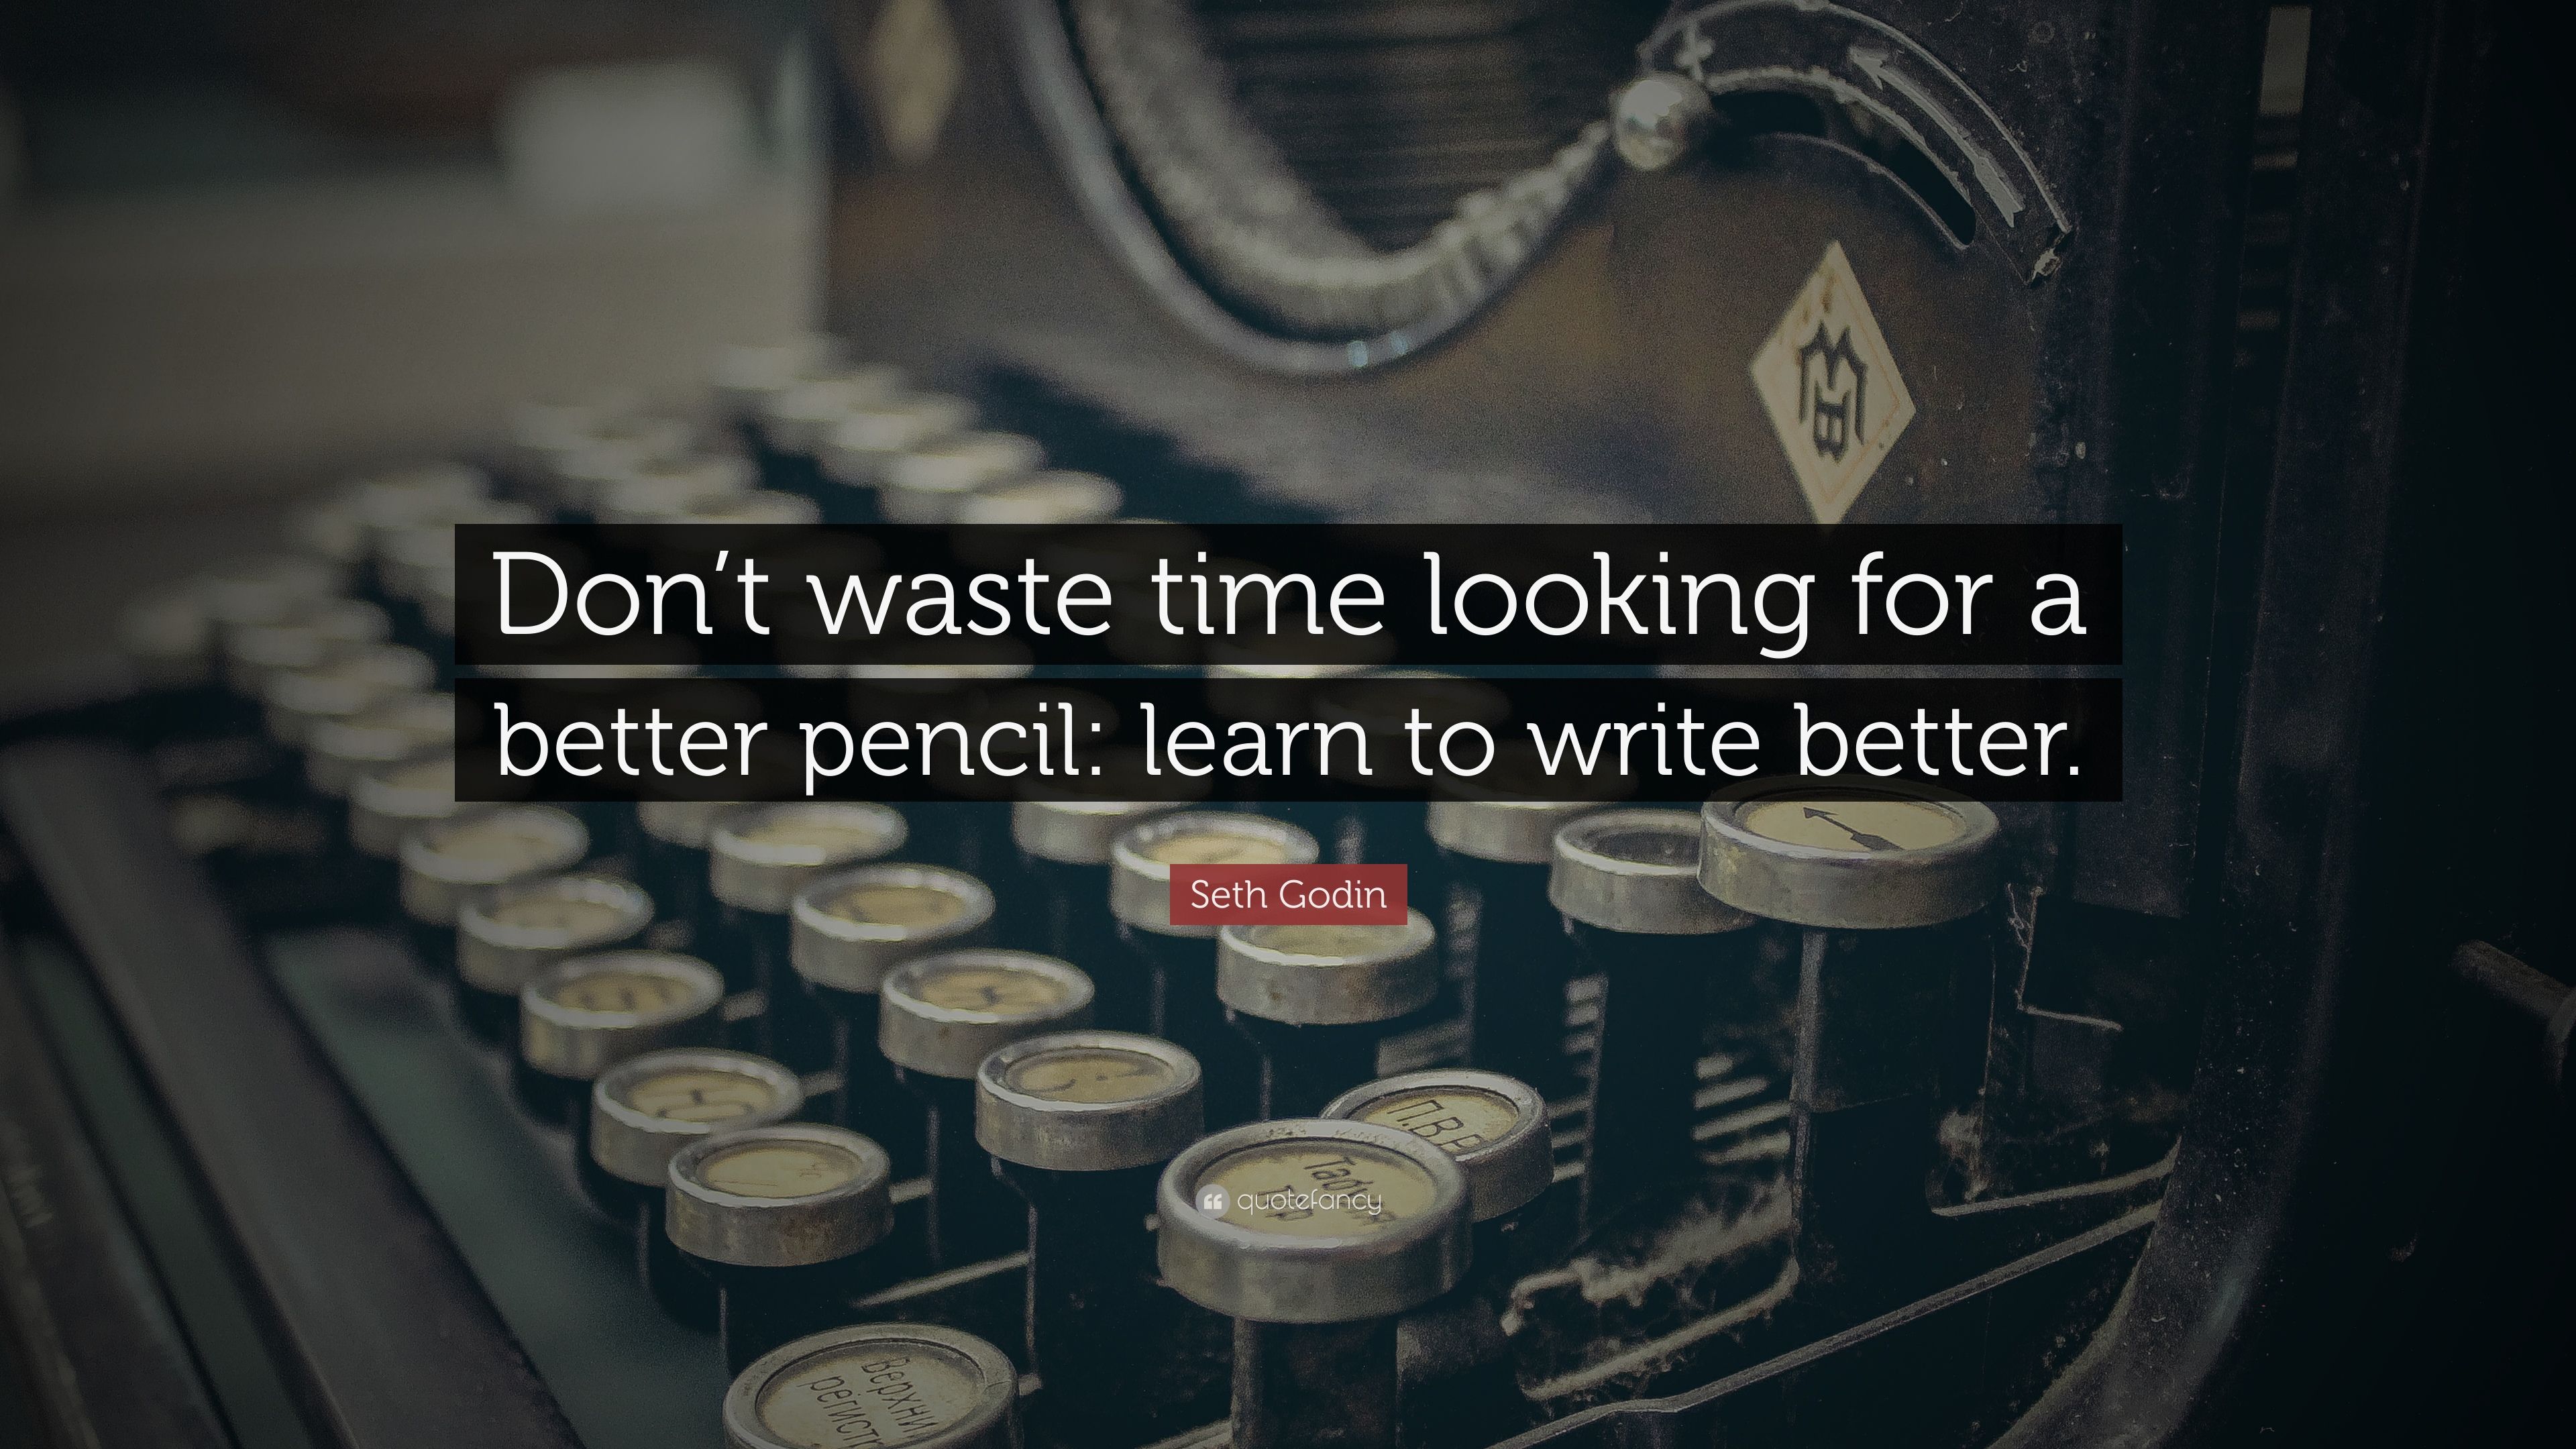 Seth Godin Quote: “Don't waste time looking for a better pencil: learn to write better.”